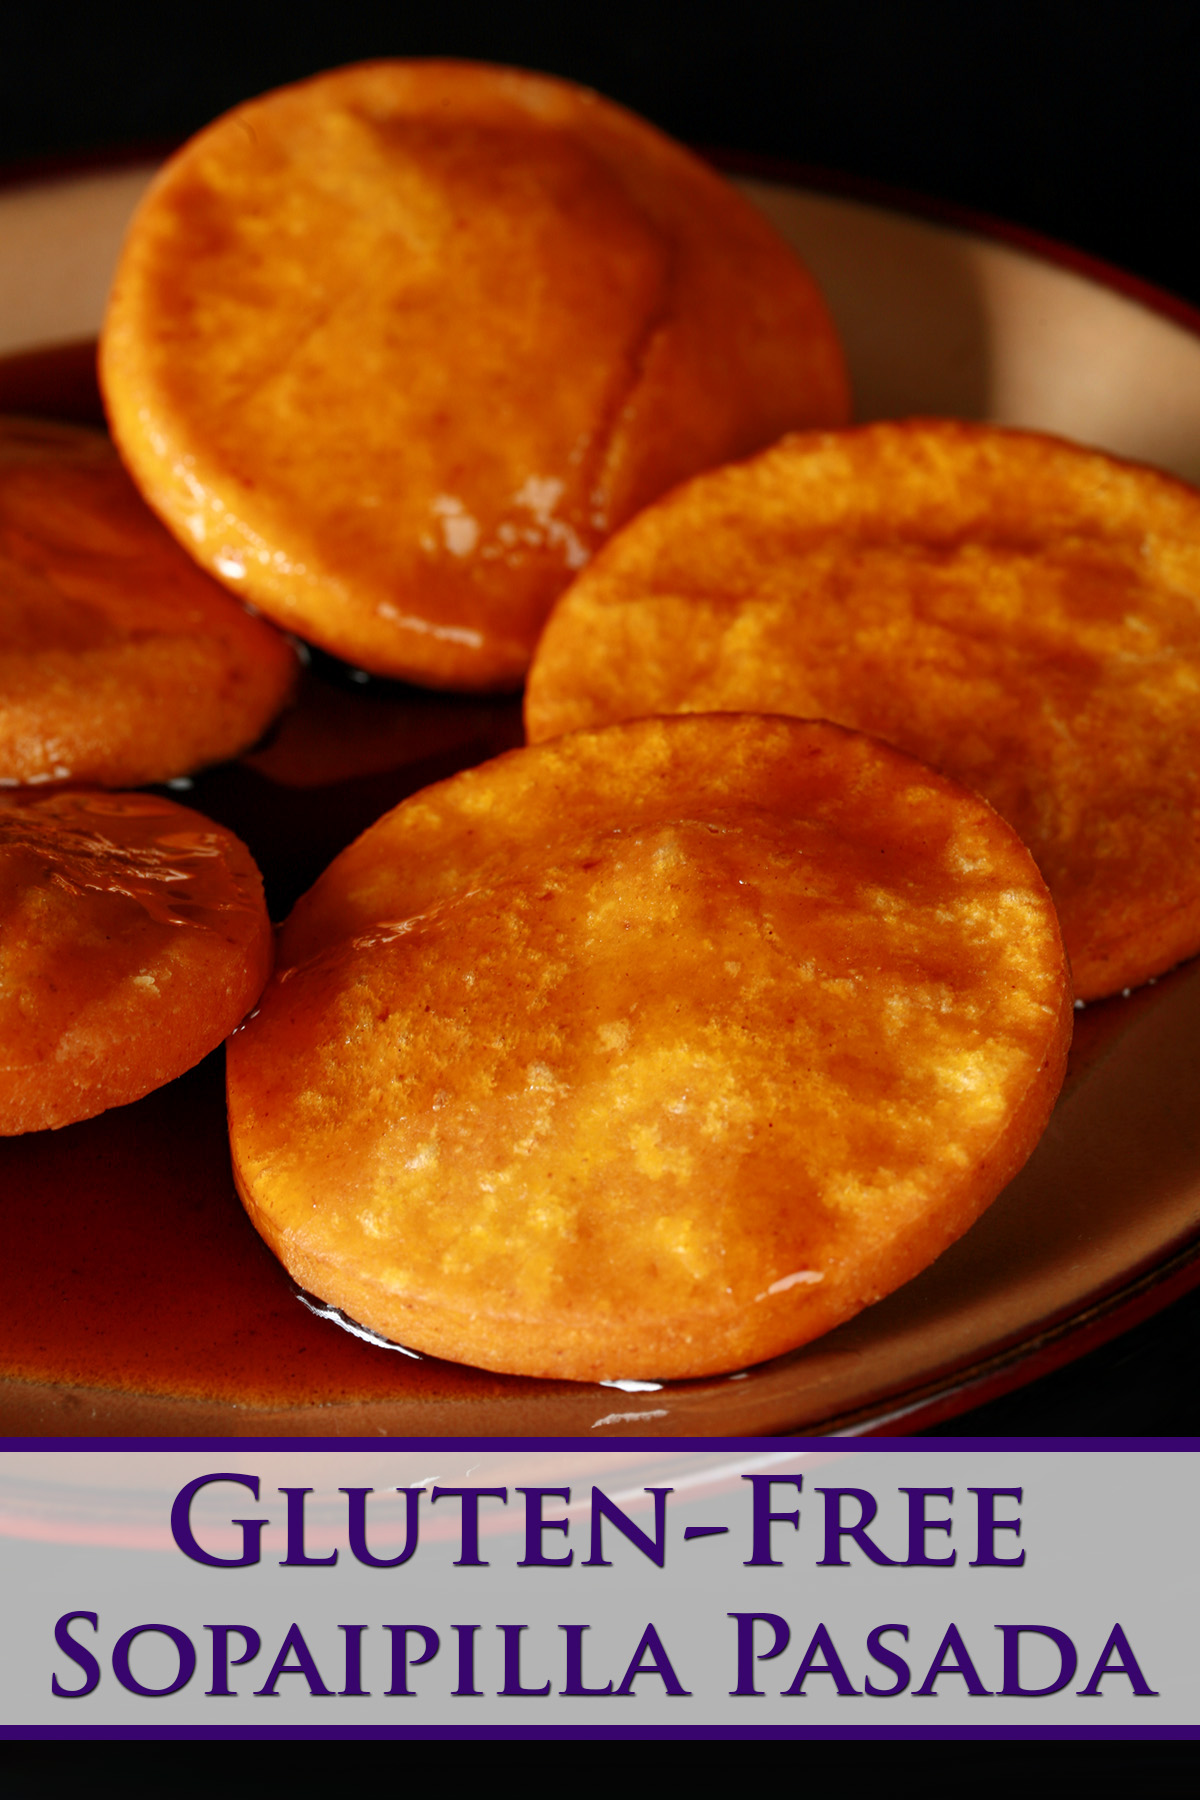 A plate of gluten free sopaipillas pasadas, with sauce drizzled over them.